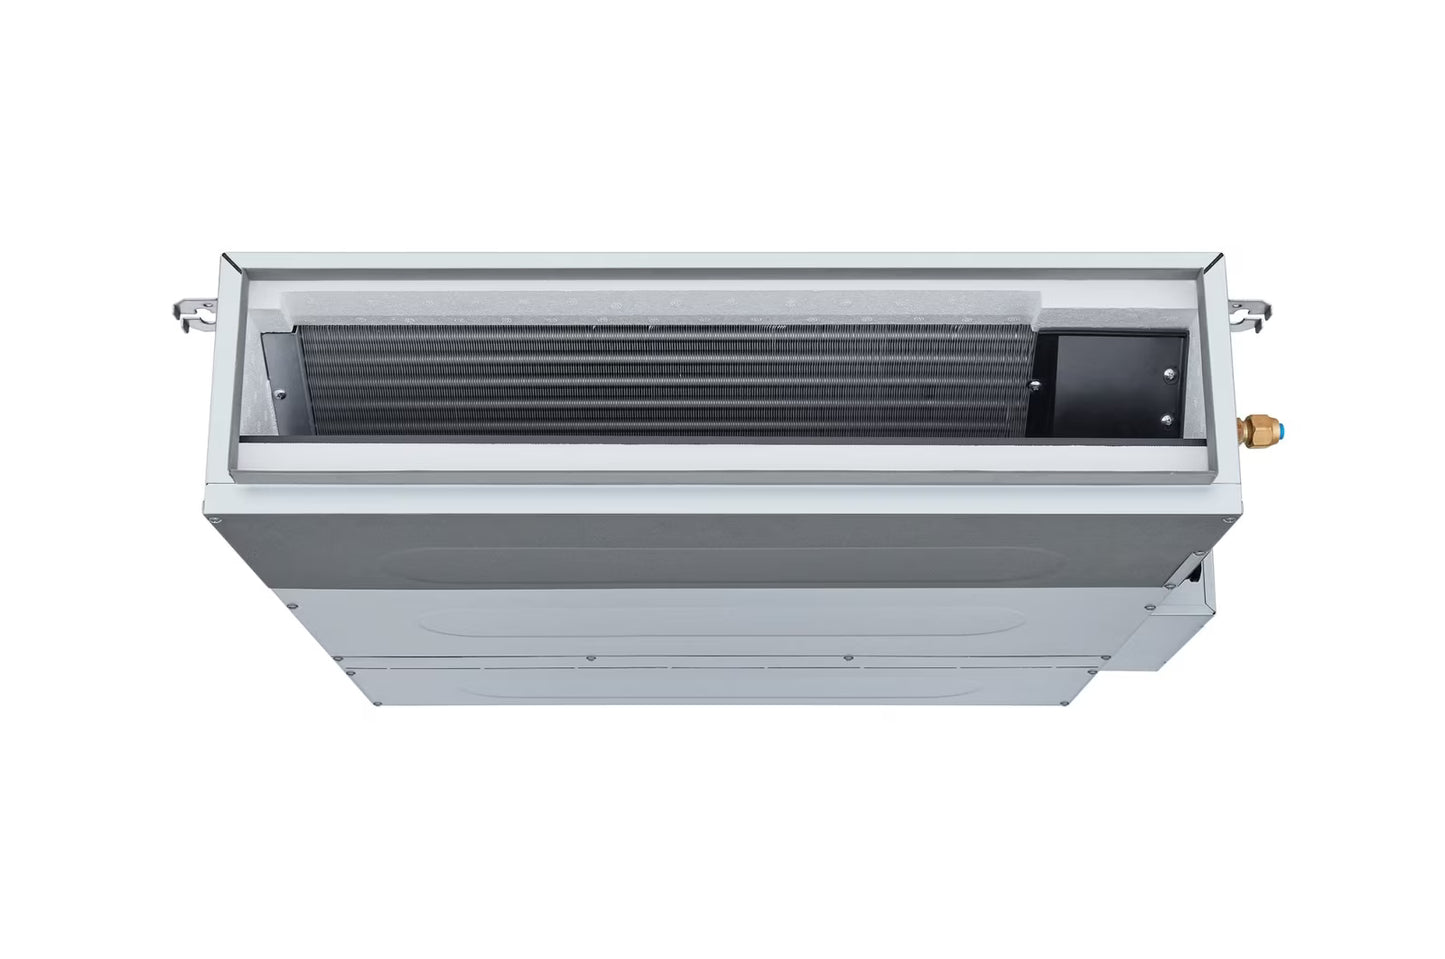 LG Ceiling Concealed Duct Unit 2.2KW with Low Static and E.S.P. Control for Multiple Rooms - ARNU07GL1G2